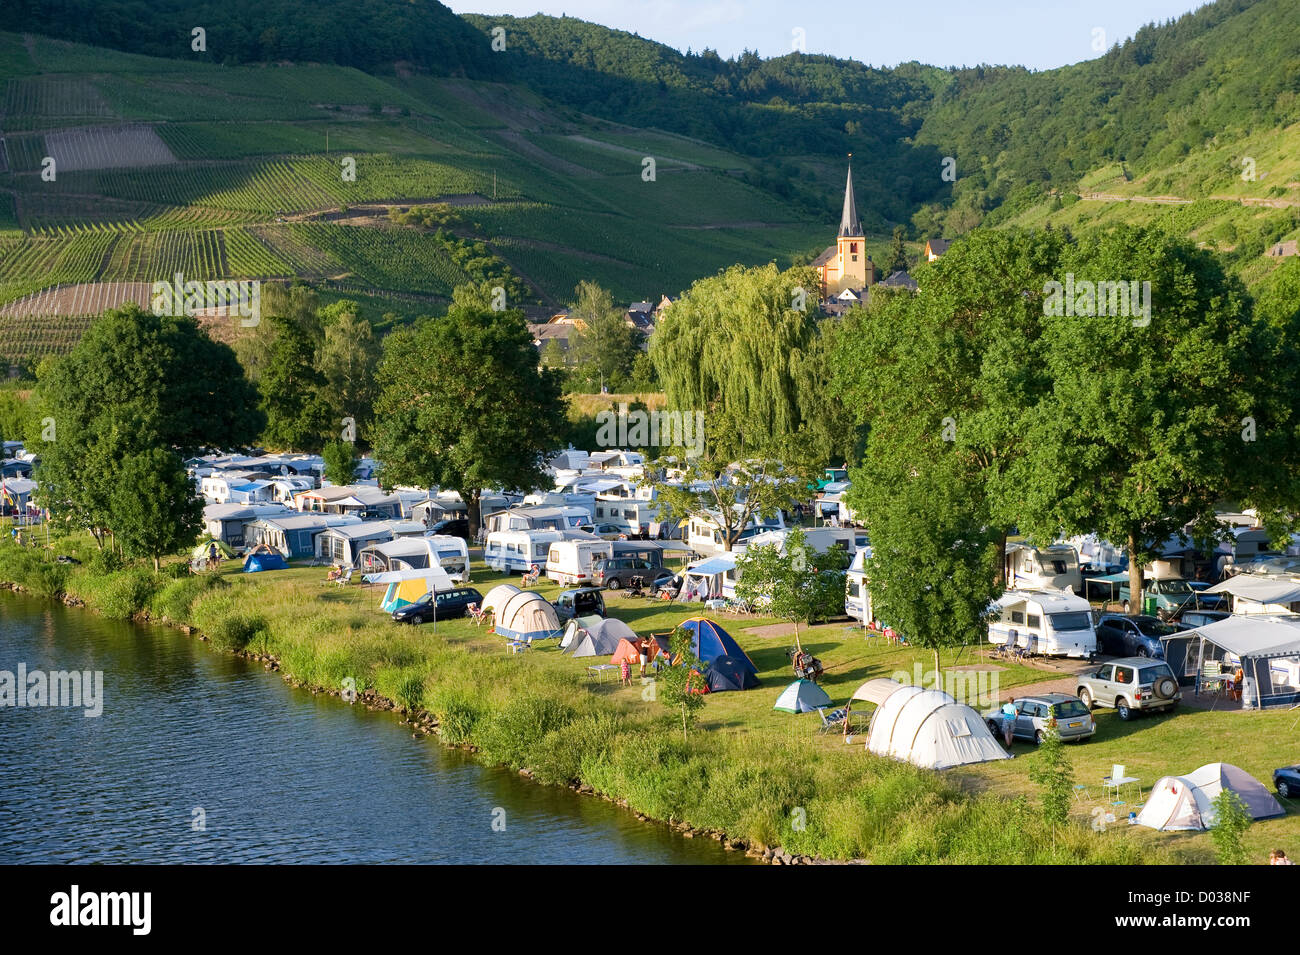 Camping on the banks of the river mosel in Germany Stock Photo